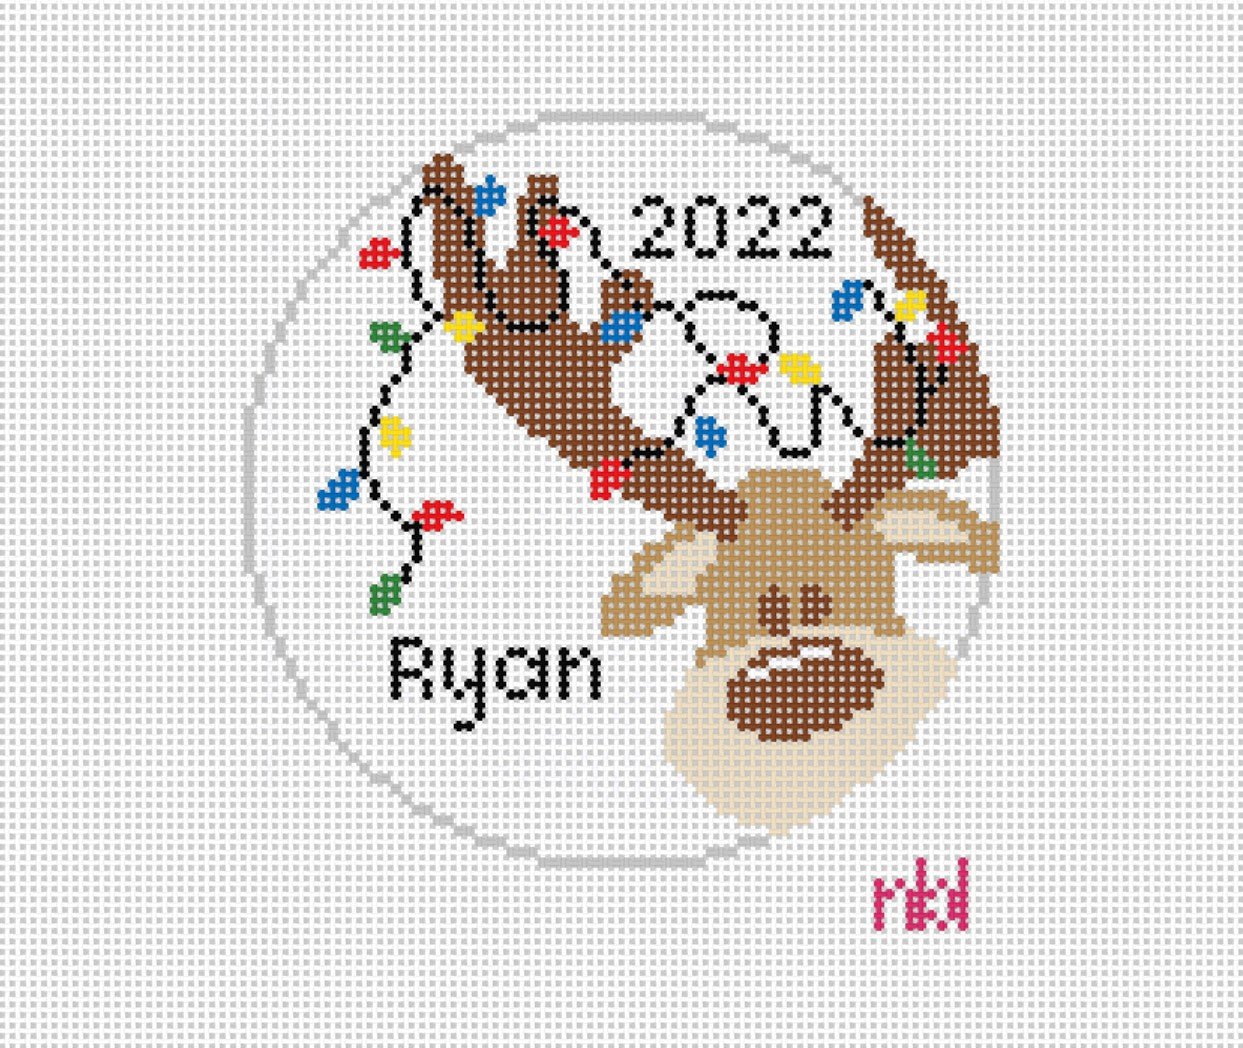 Reindeer with personalization - Needlepoint by Laura